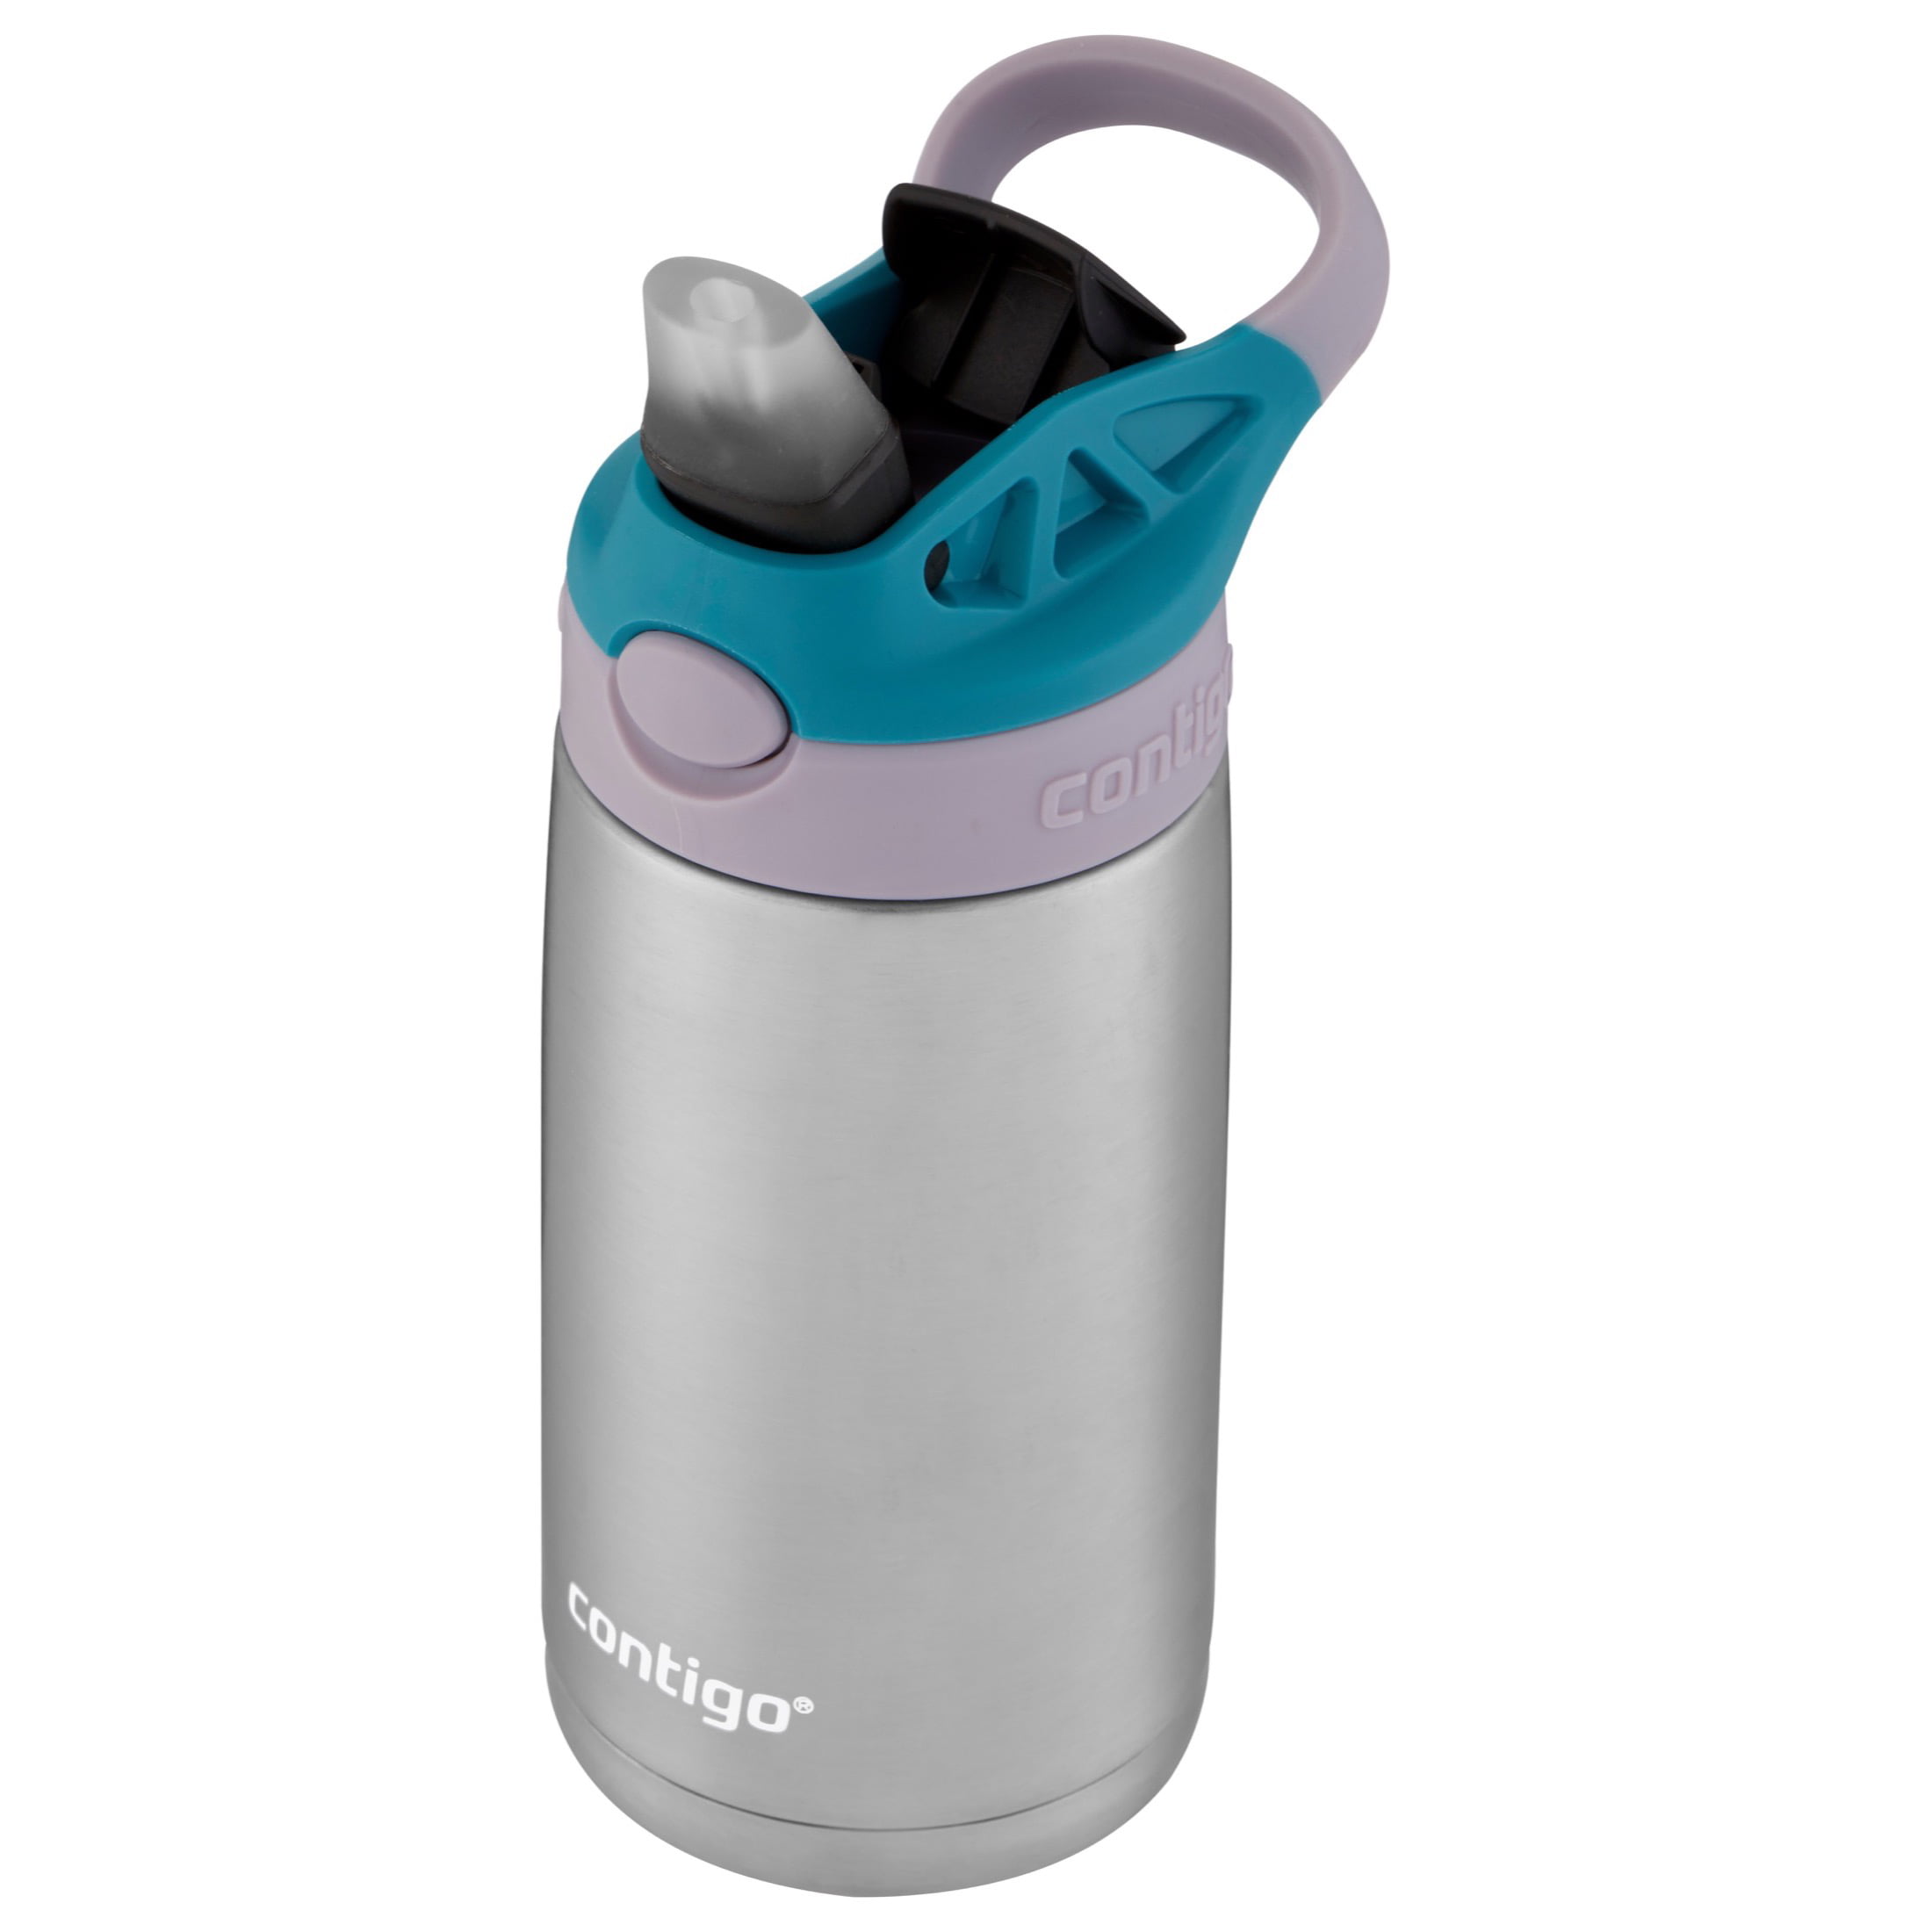 Contigo Kids Water Bottle with Redesigned AUTOSPOUT Straw, Eggplant & Punch  20 oz